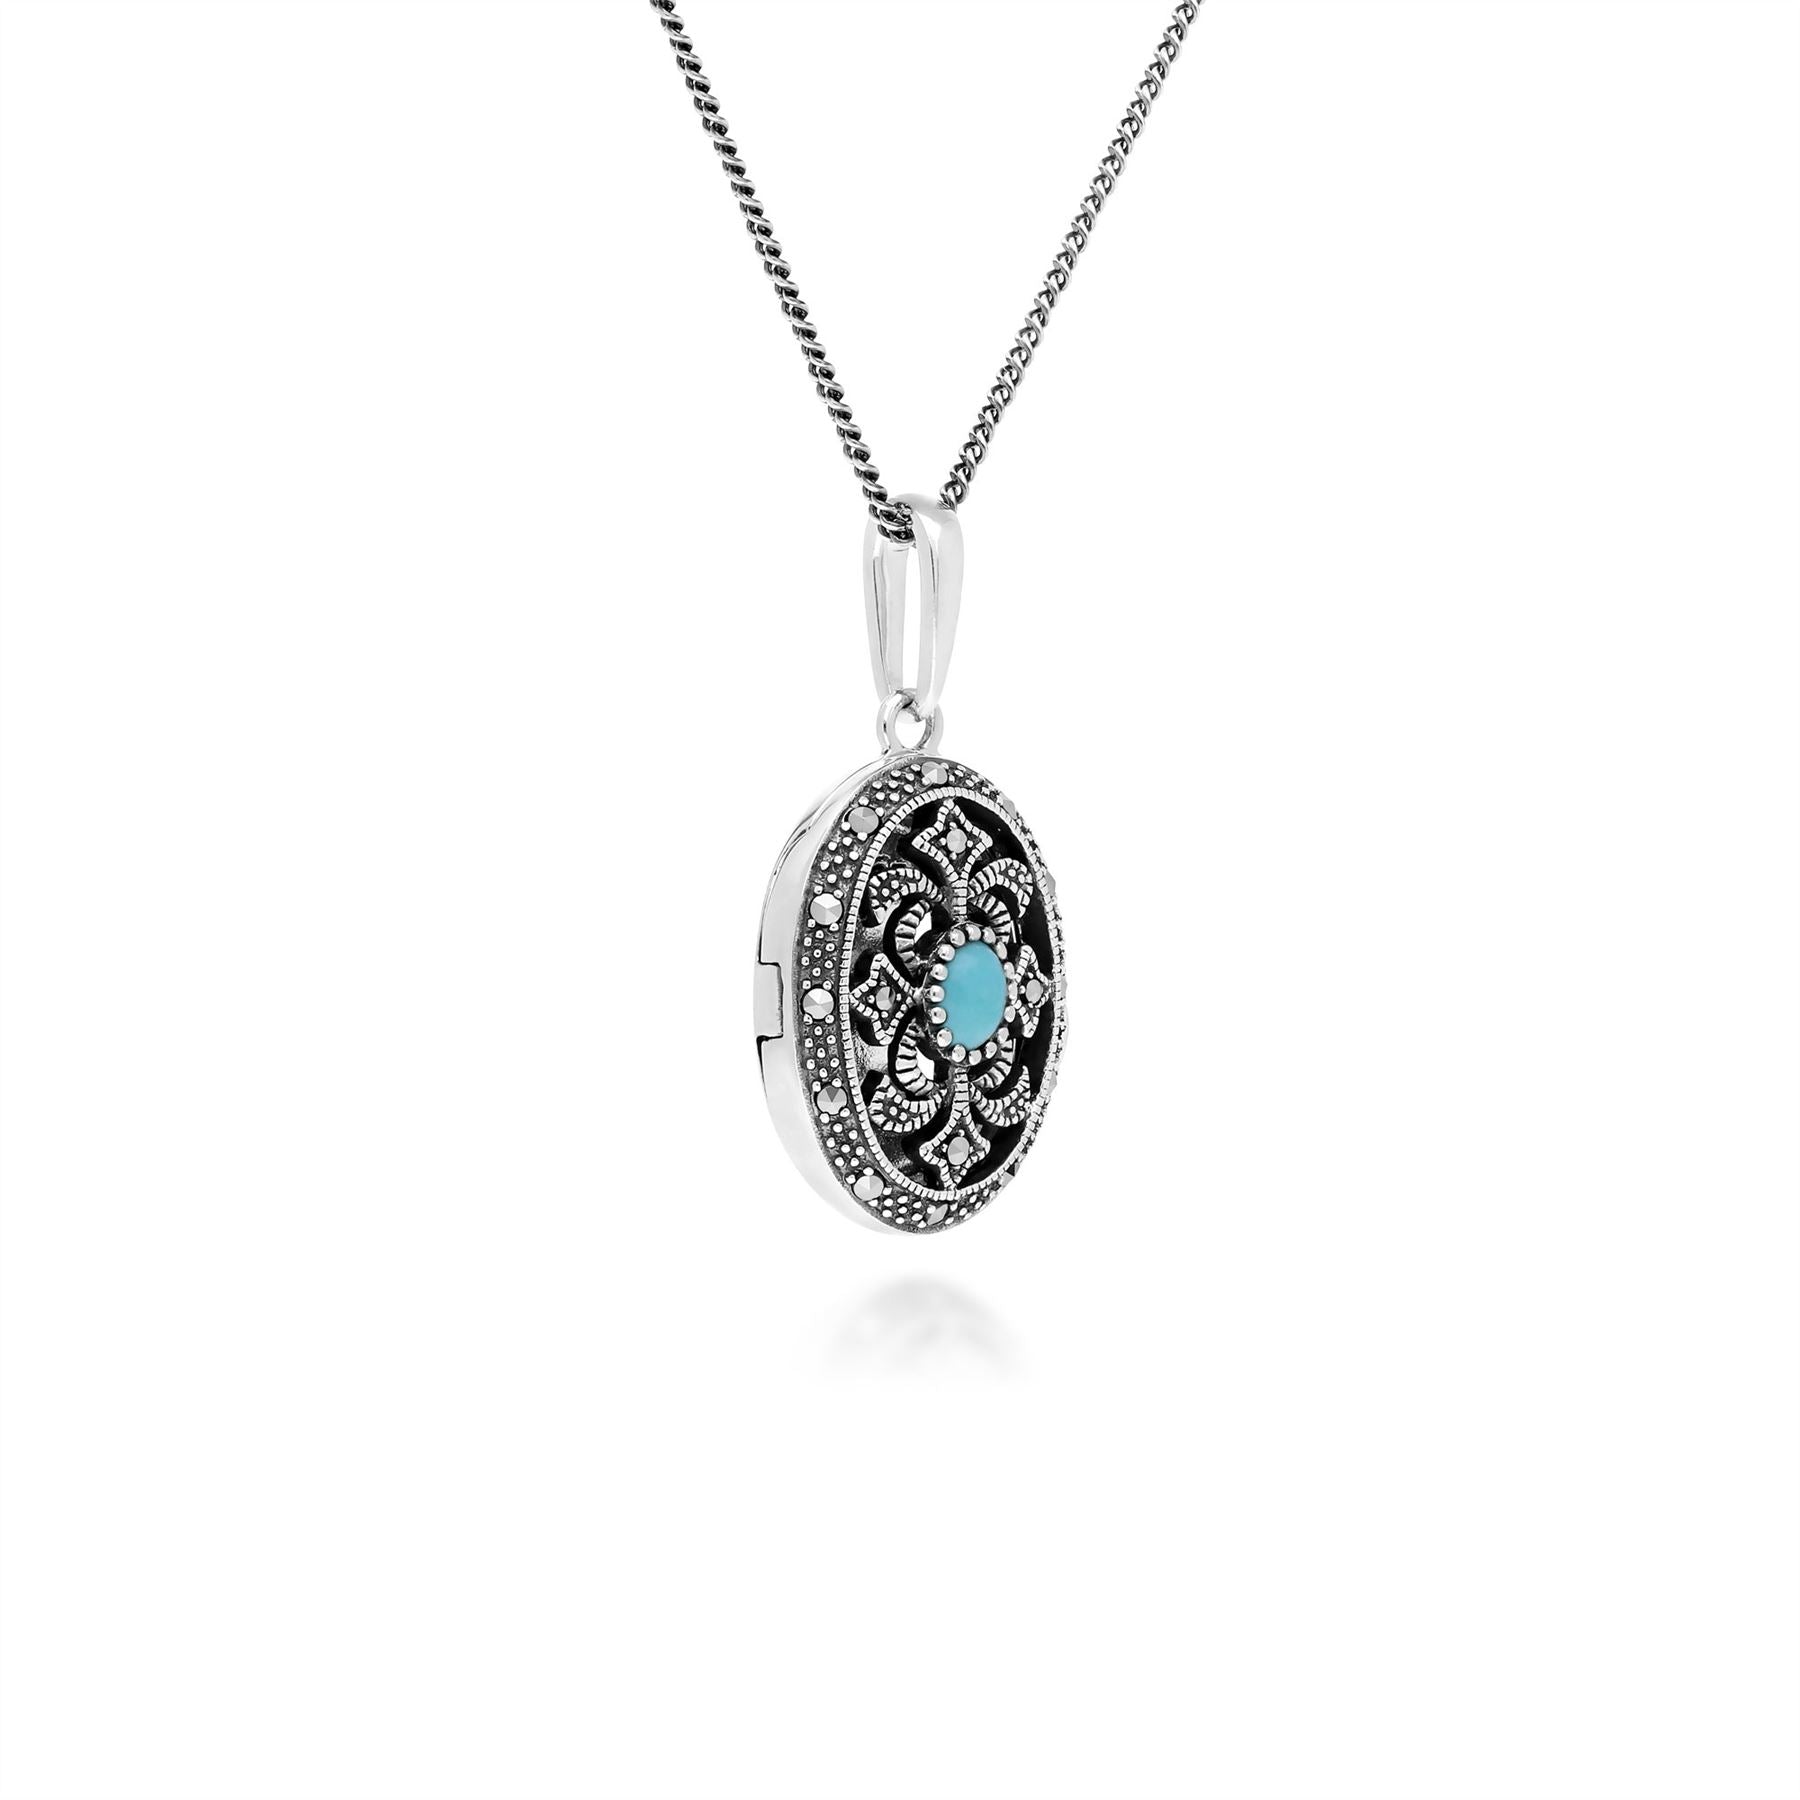 Art Nouveau Style Oval Turquoise & Marcasite Locket Necklace in 925 Sterling Silver